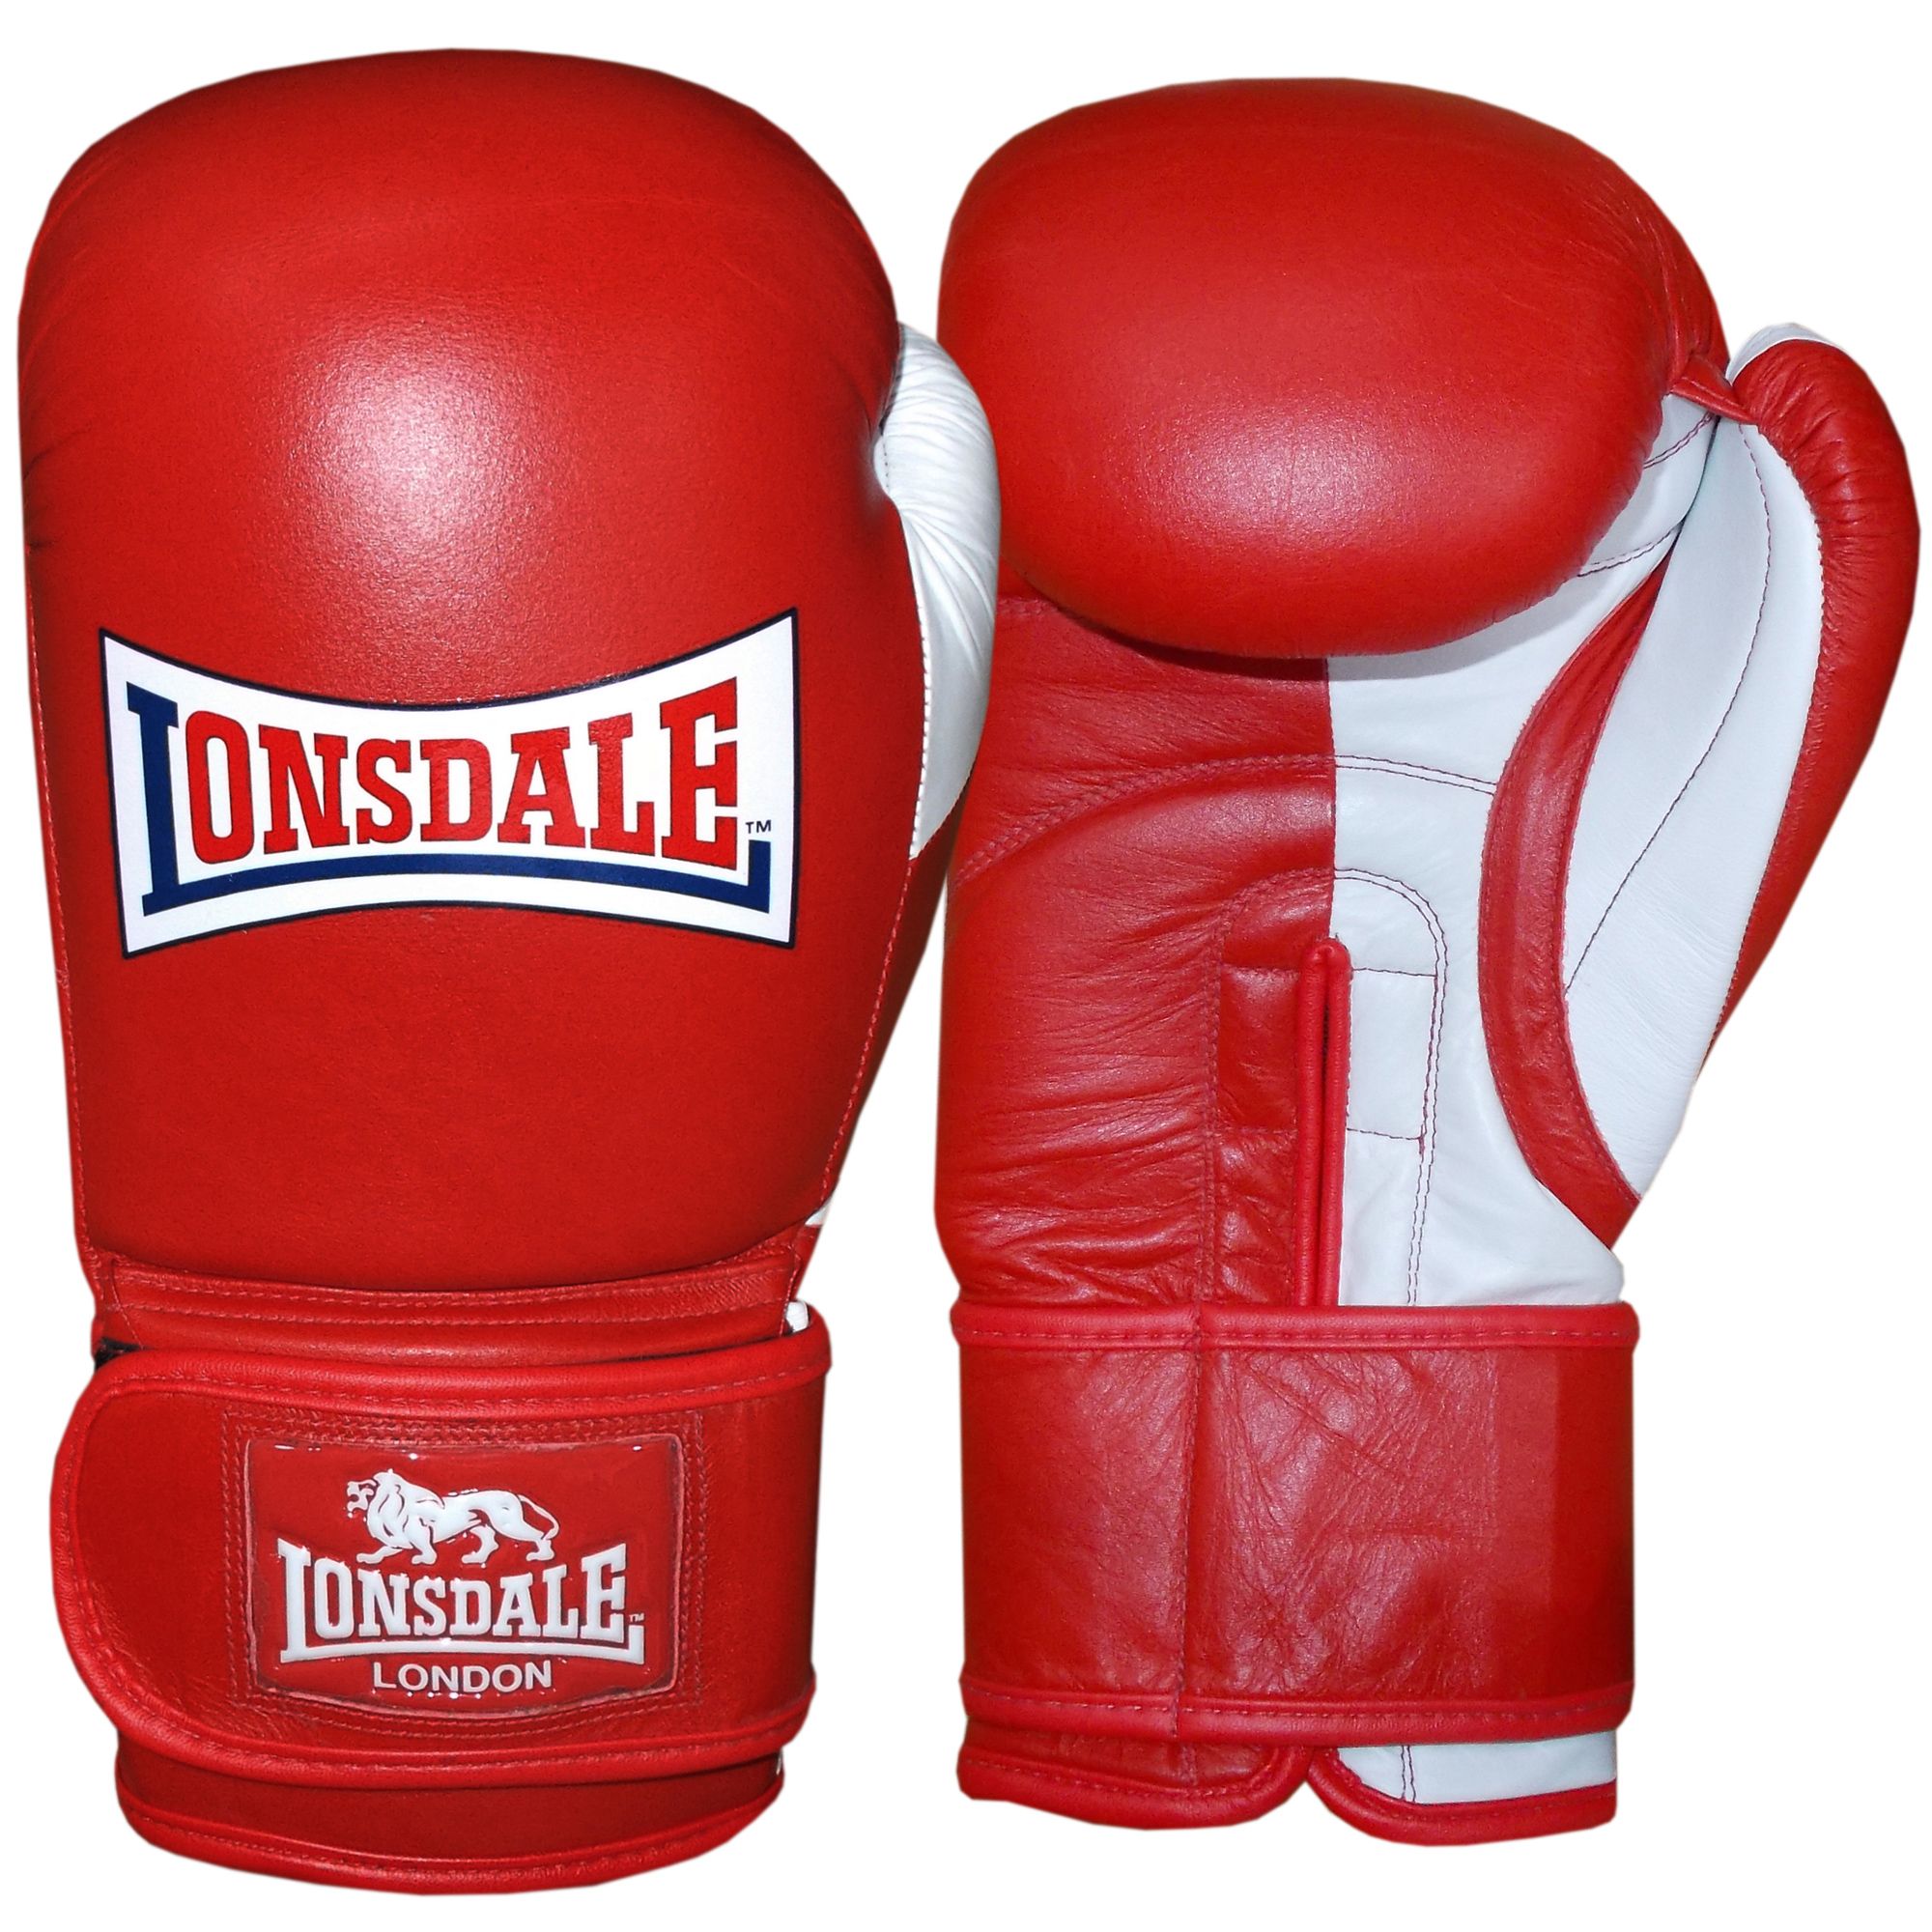 lonsdale leather club sparring gloves review